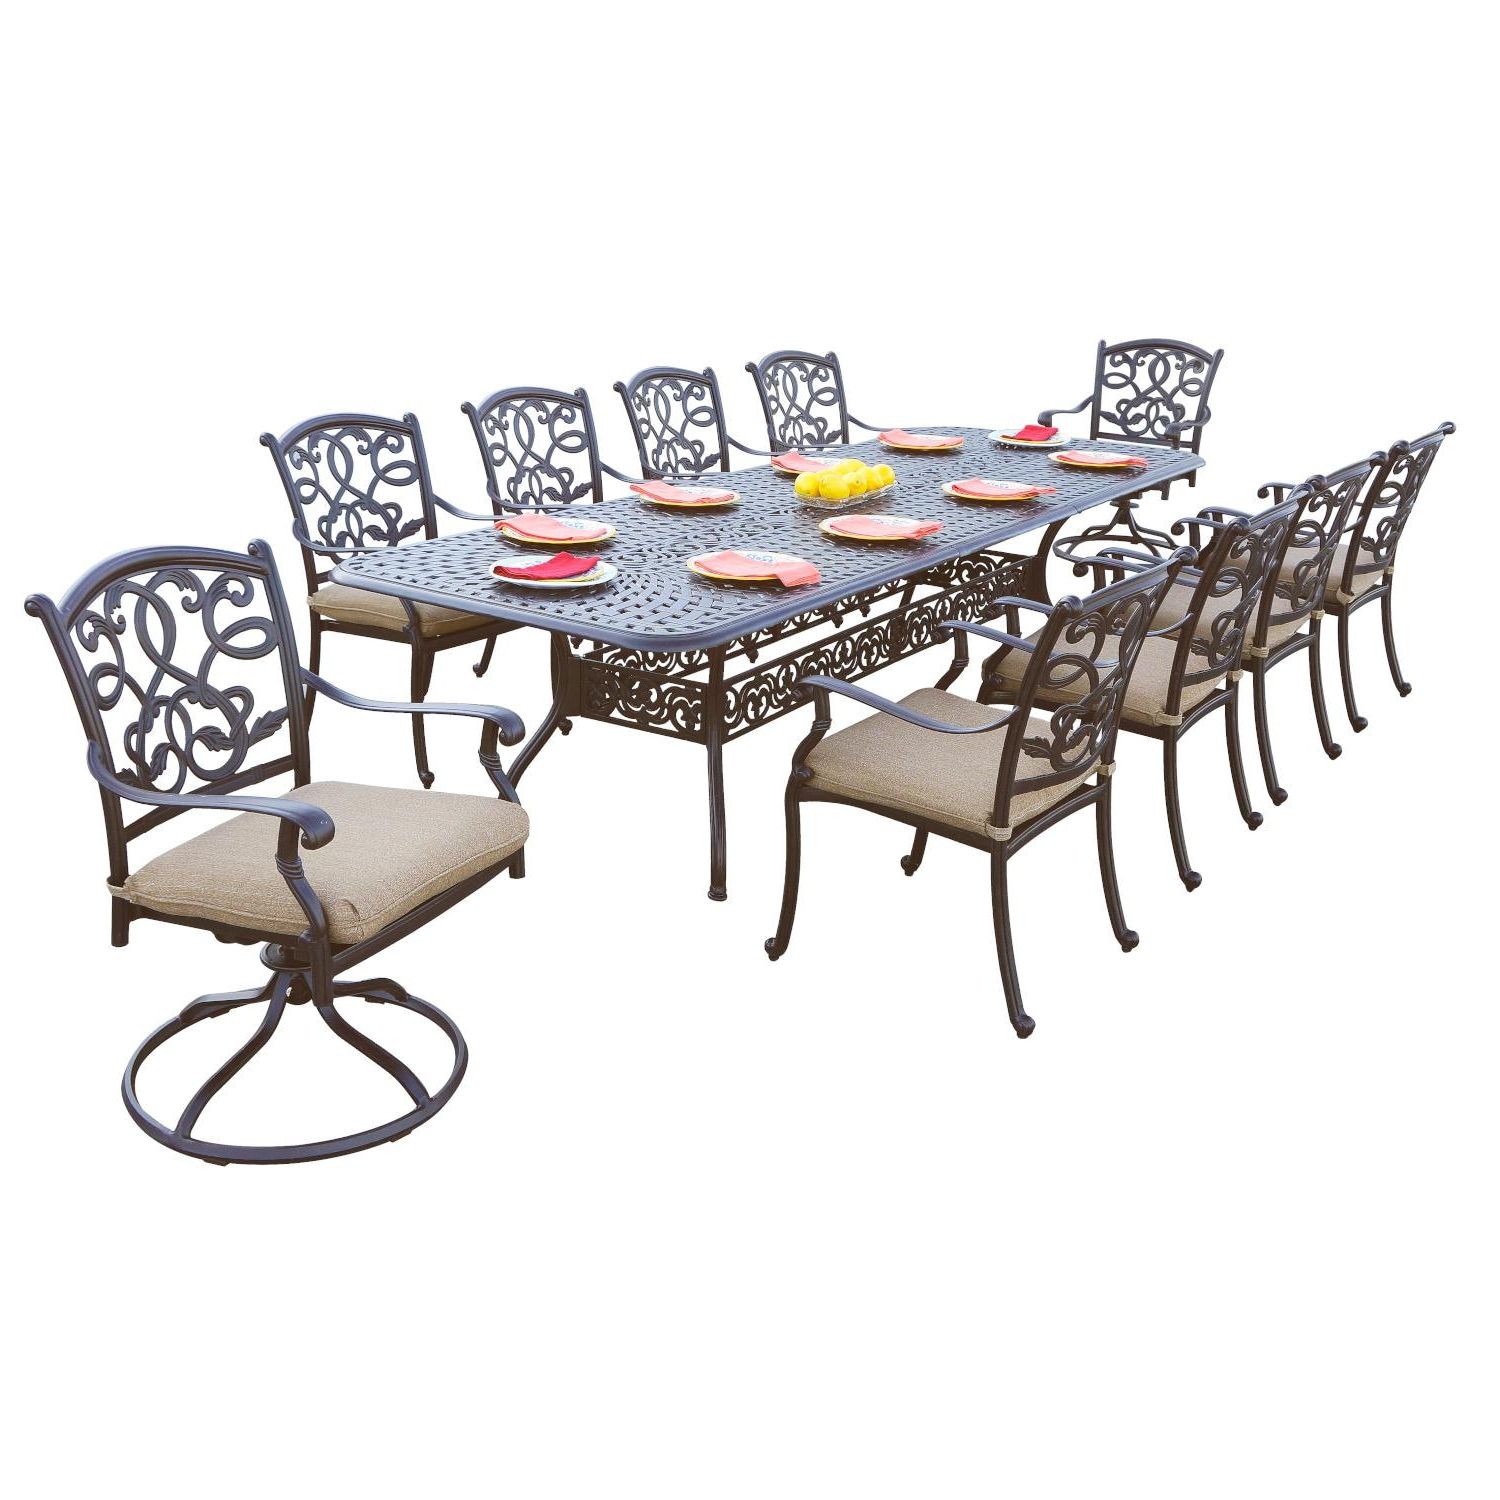 Darlee Santa Monica 11 Piece Cast Aluminum Patio Dining Set W/ 92 X 42 Throughout Famous 11 Piece Extendable Patio Dining Sets (View 13 of 15)